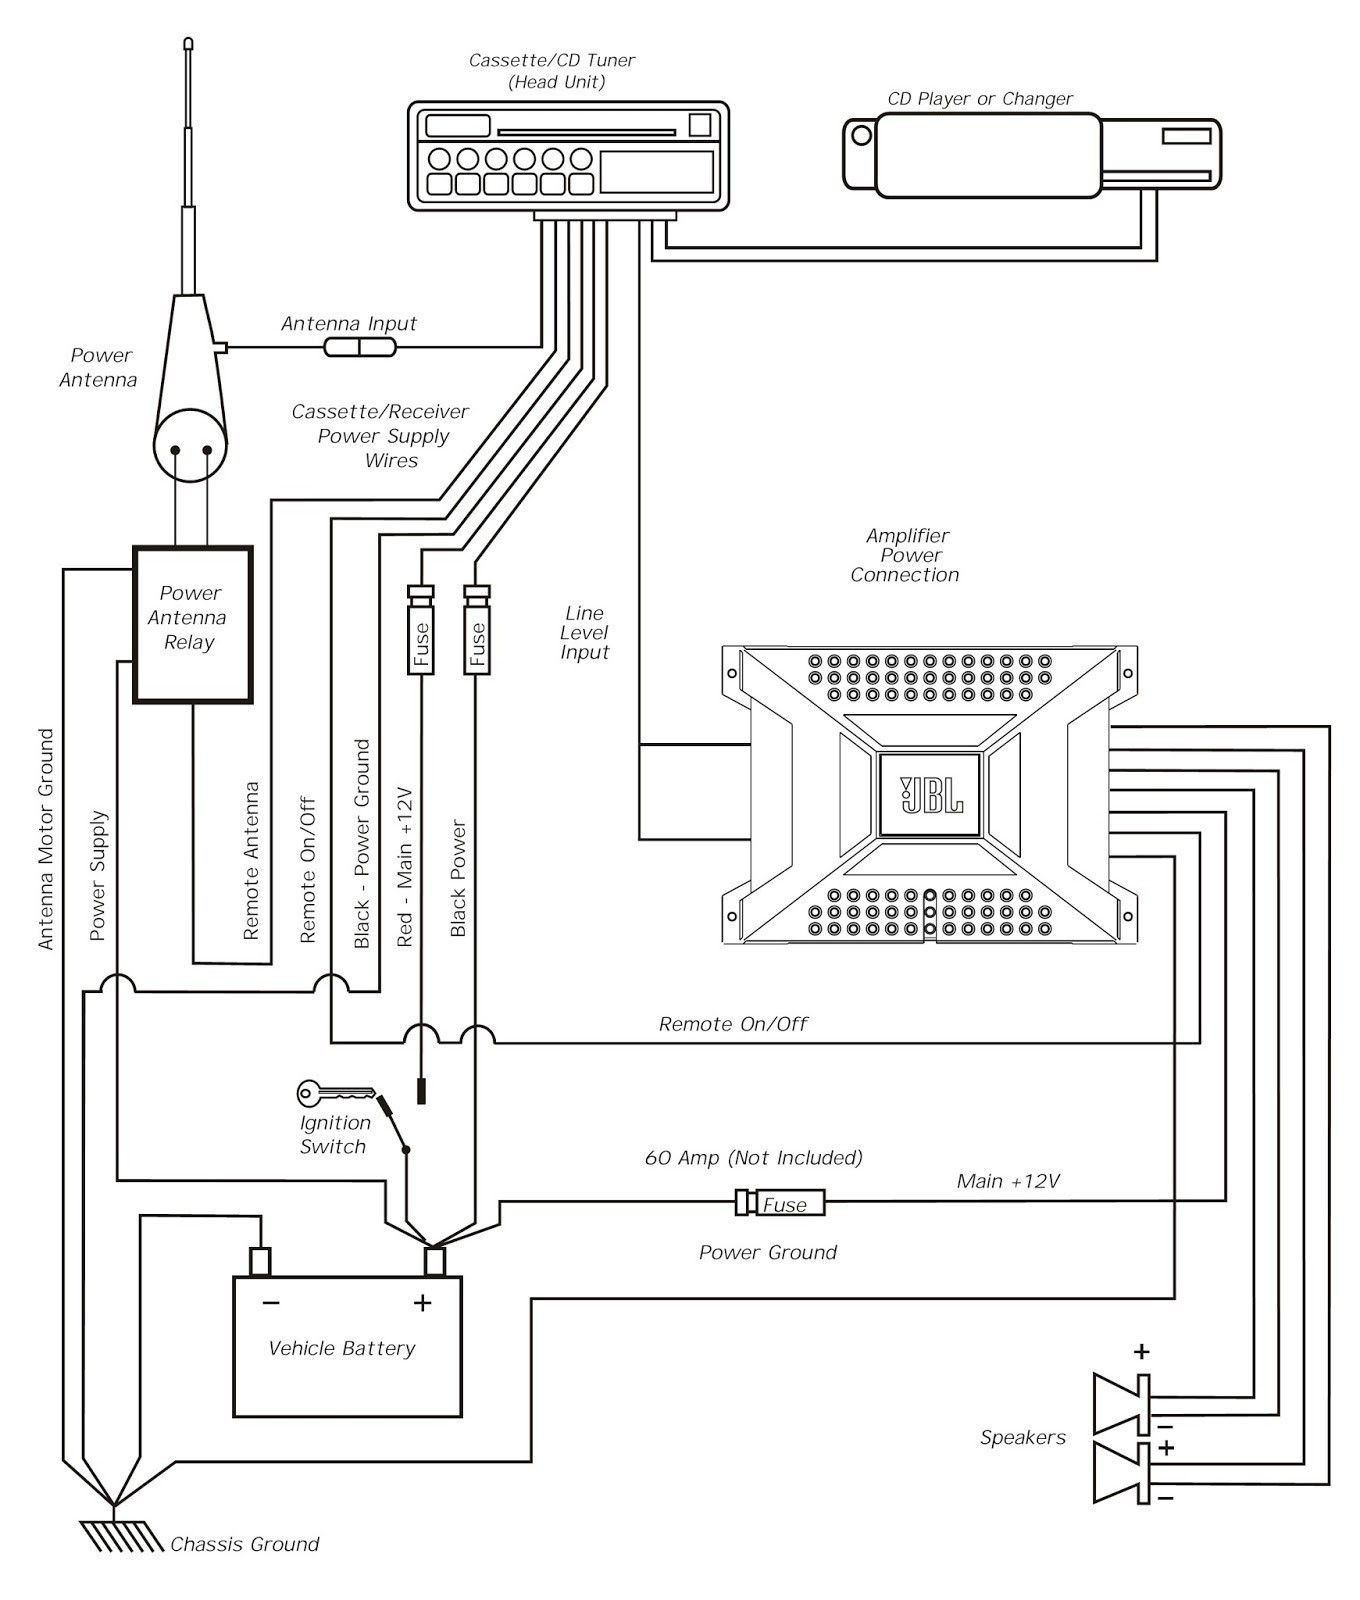 Wiring Diagram For A Kenwood Car Stereo Perfect Wiring Diagram Kenwood Stereo Best Wiring Diagram For A Kenwood